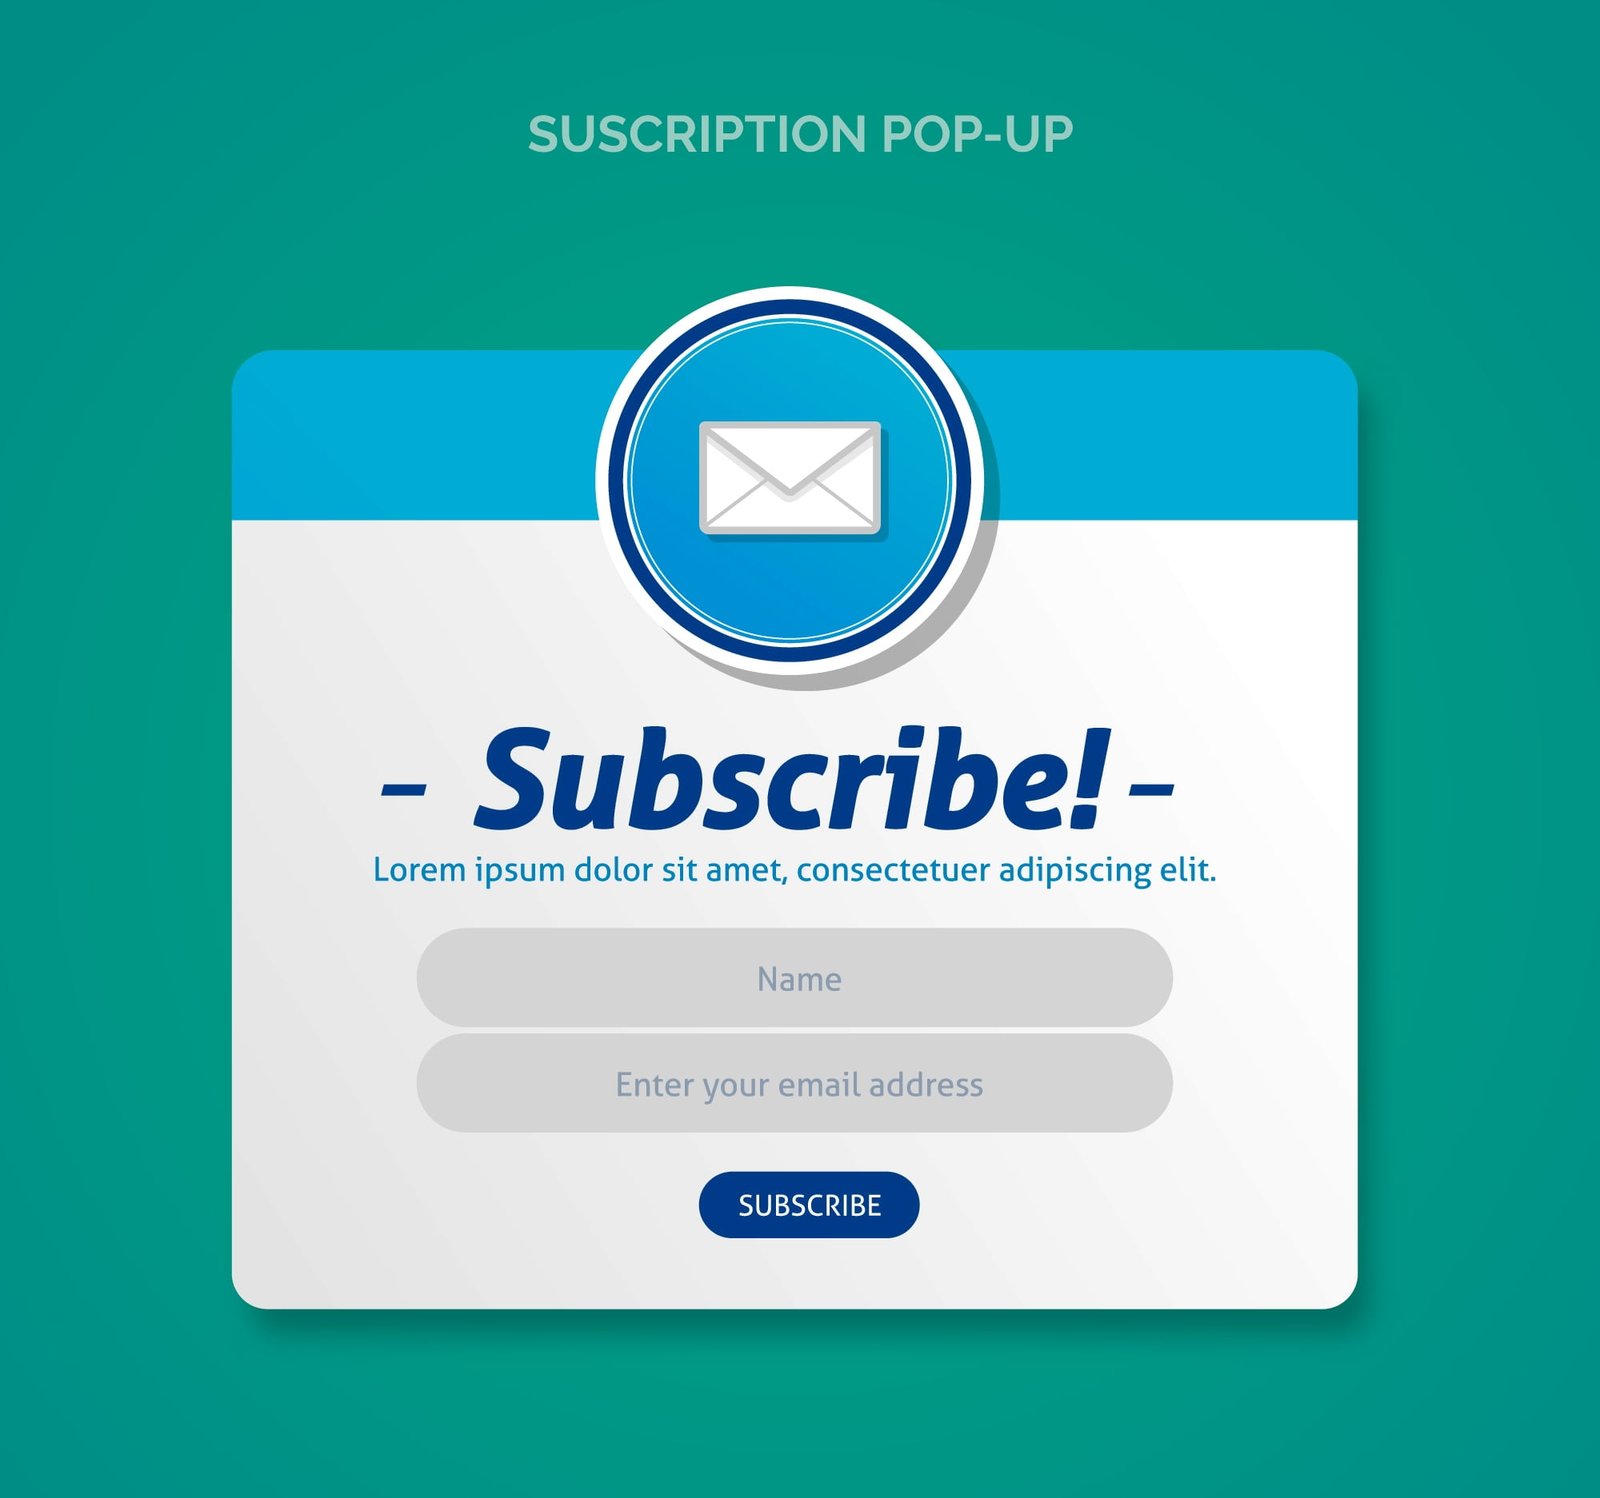 opt-in rates- Pop-ups for signing up